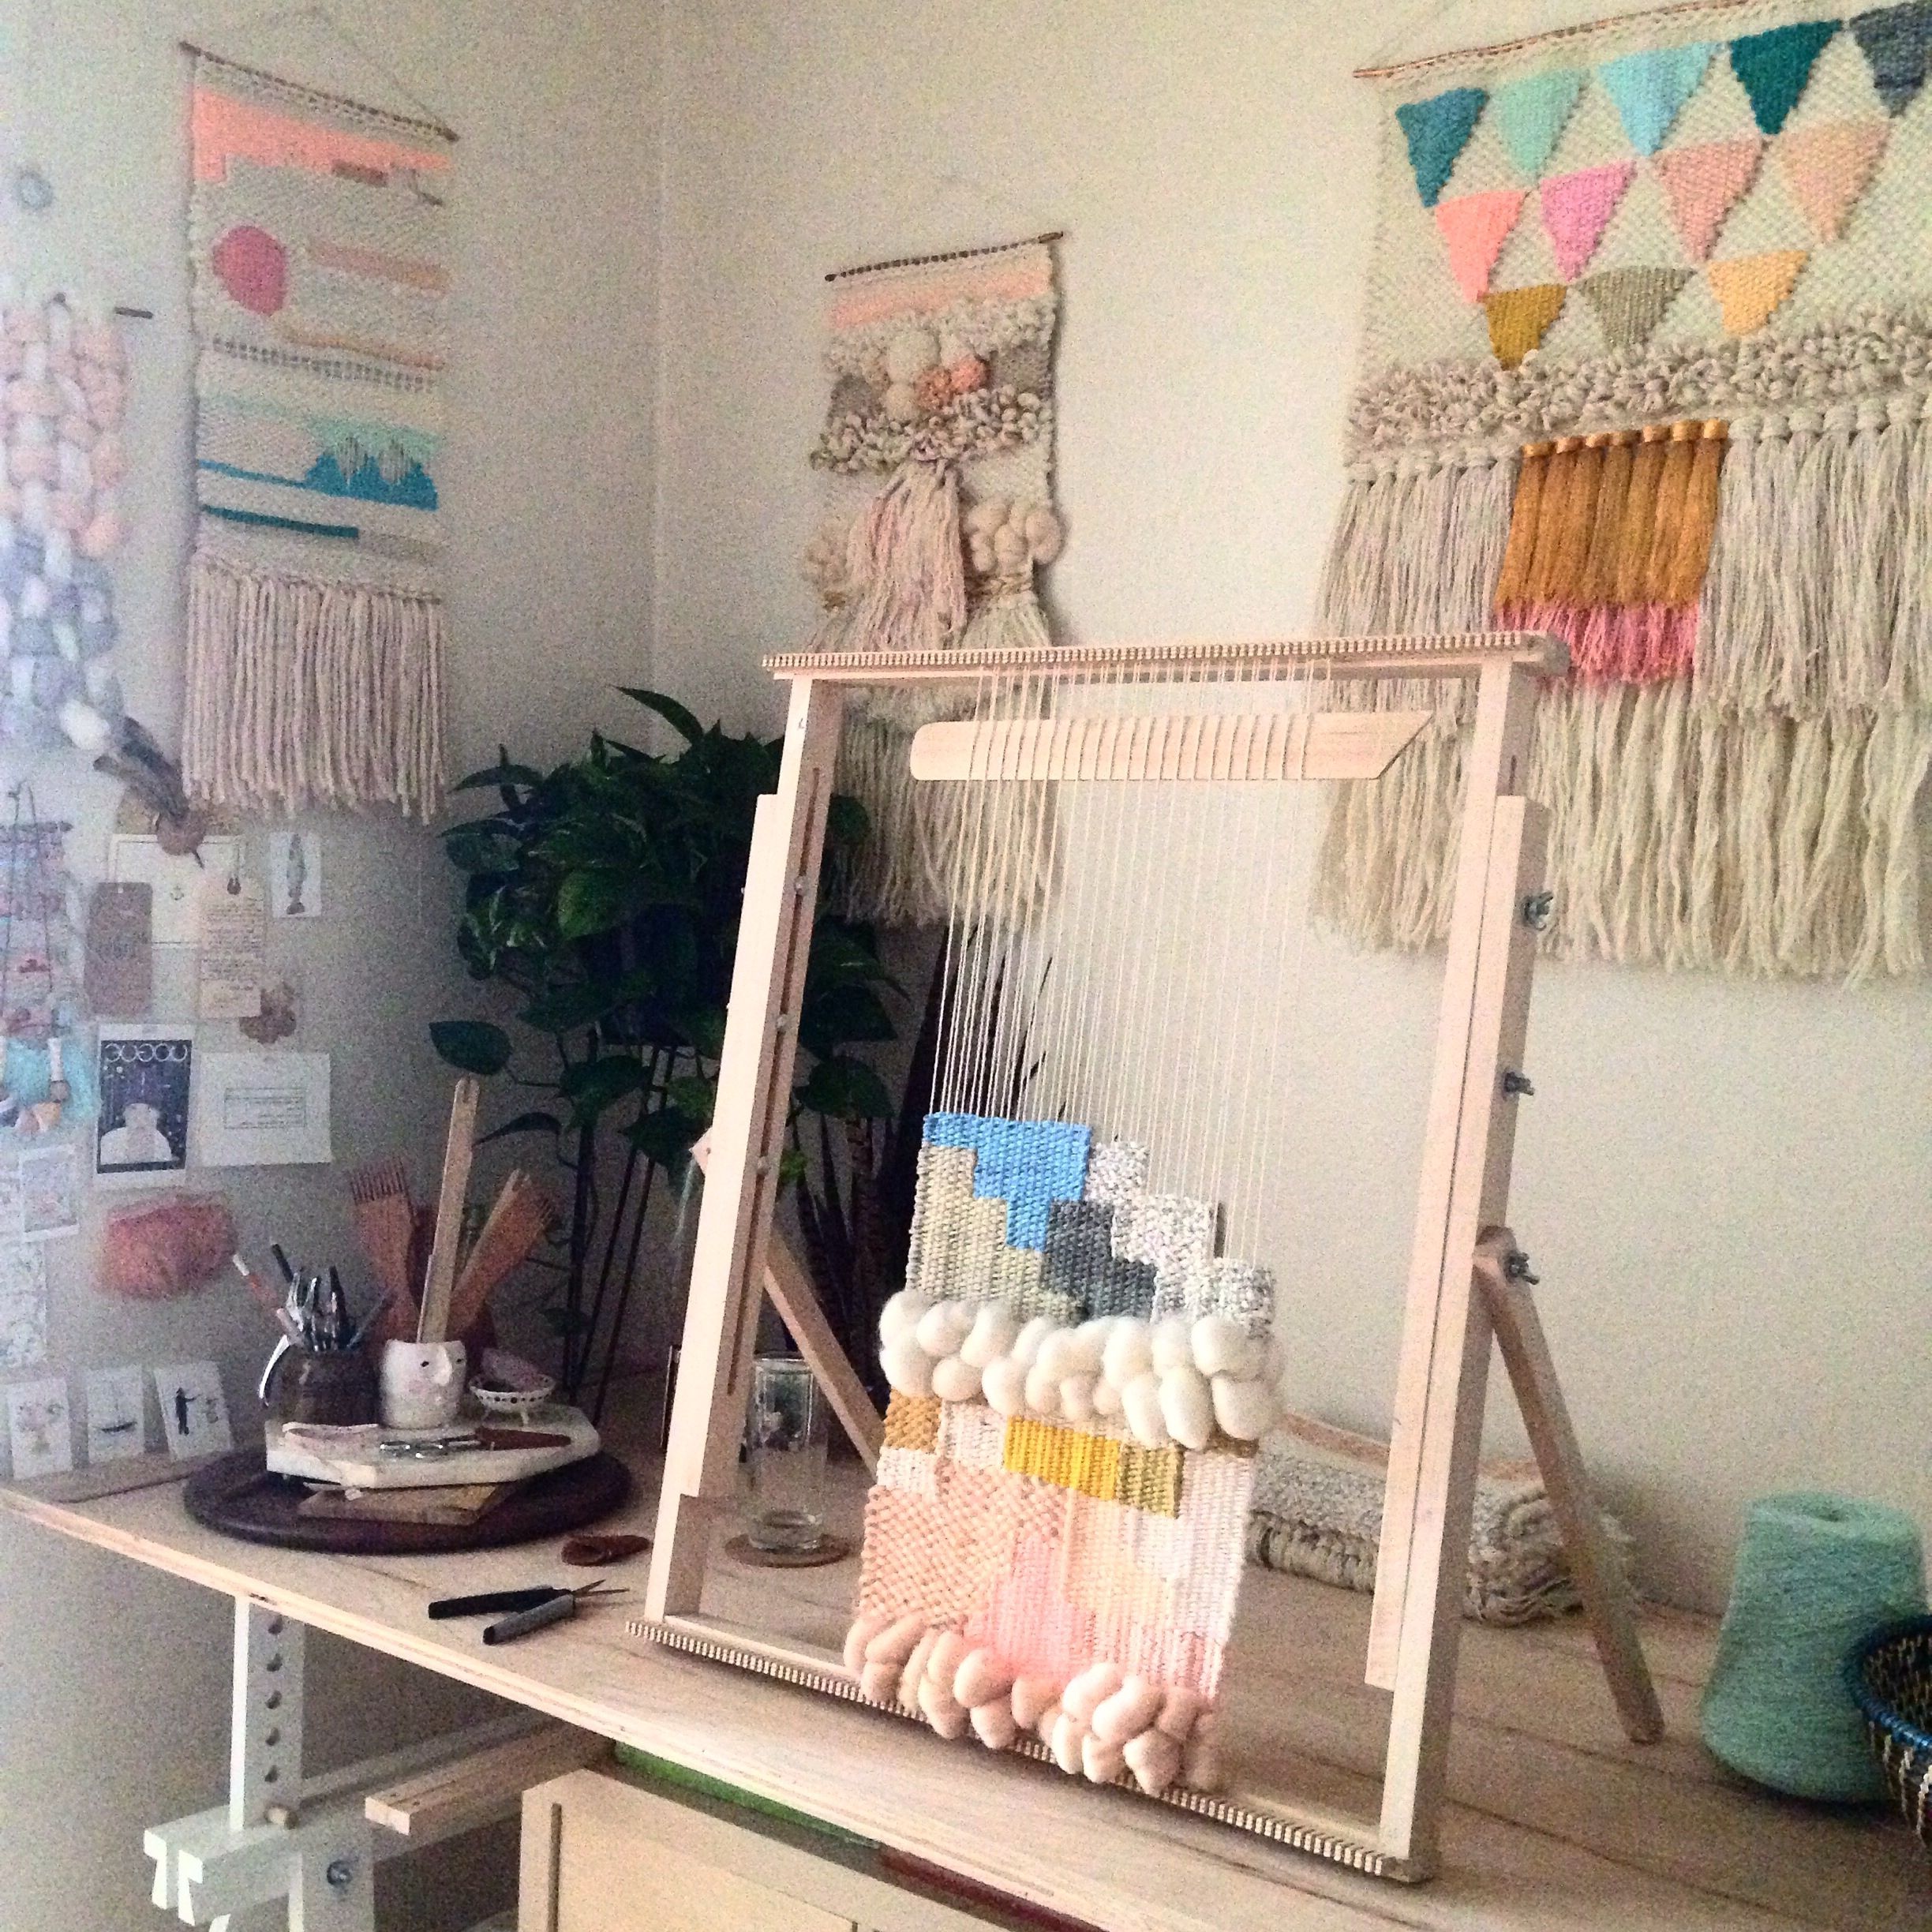 Diy Textile Wall Art Within Popular Woven Wall Hanging On The Loom Weavingmaryanne Moodie Www (View 6 of 15)